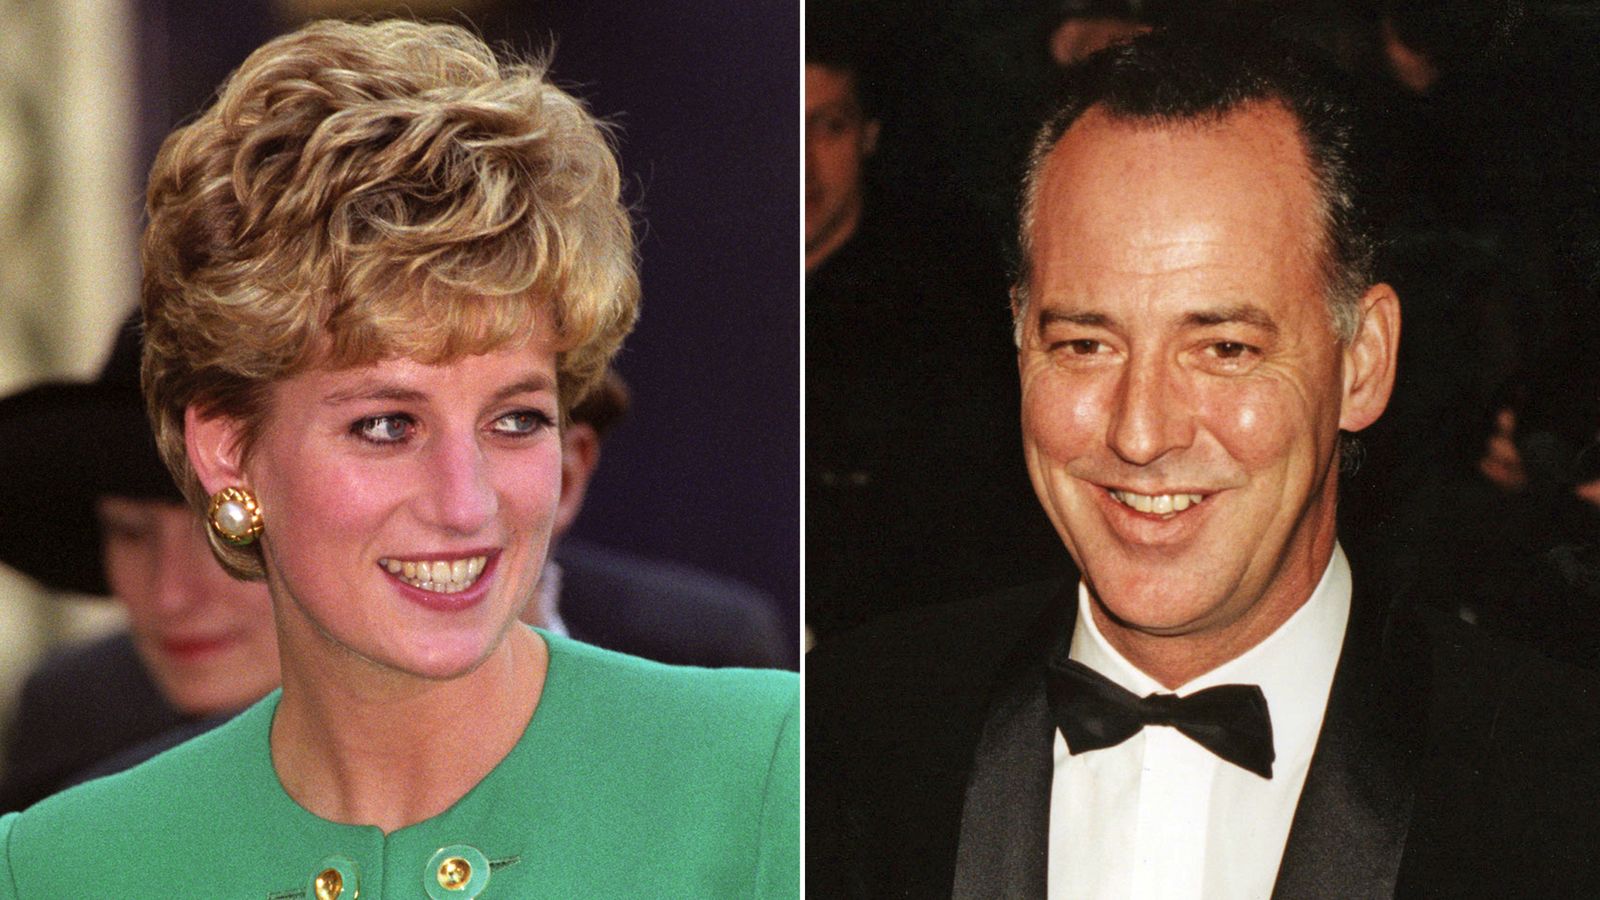 Prince Harry accused of wasting court's time - as Diana's letters to Michael Barrymore read out